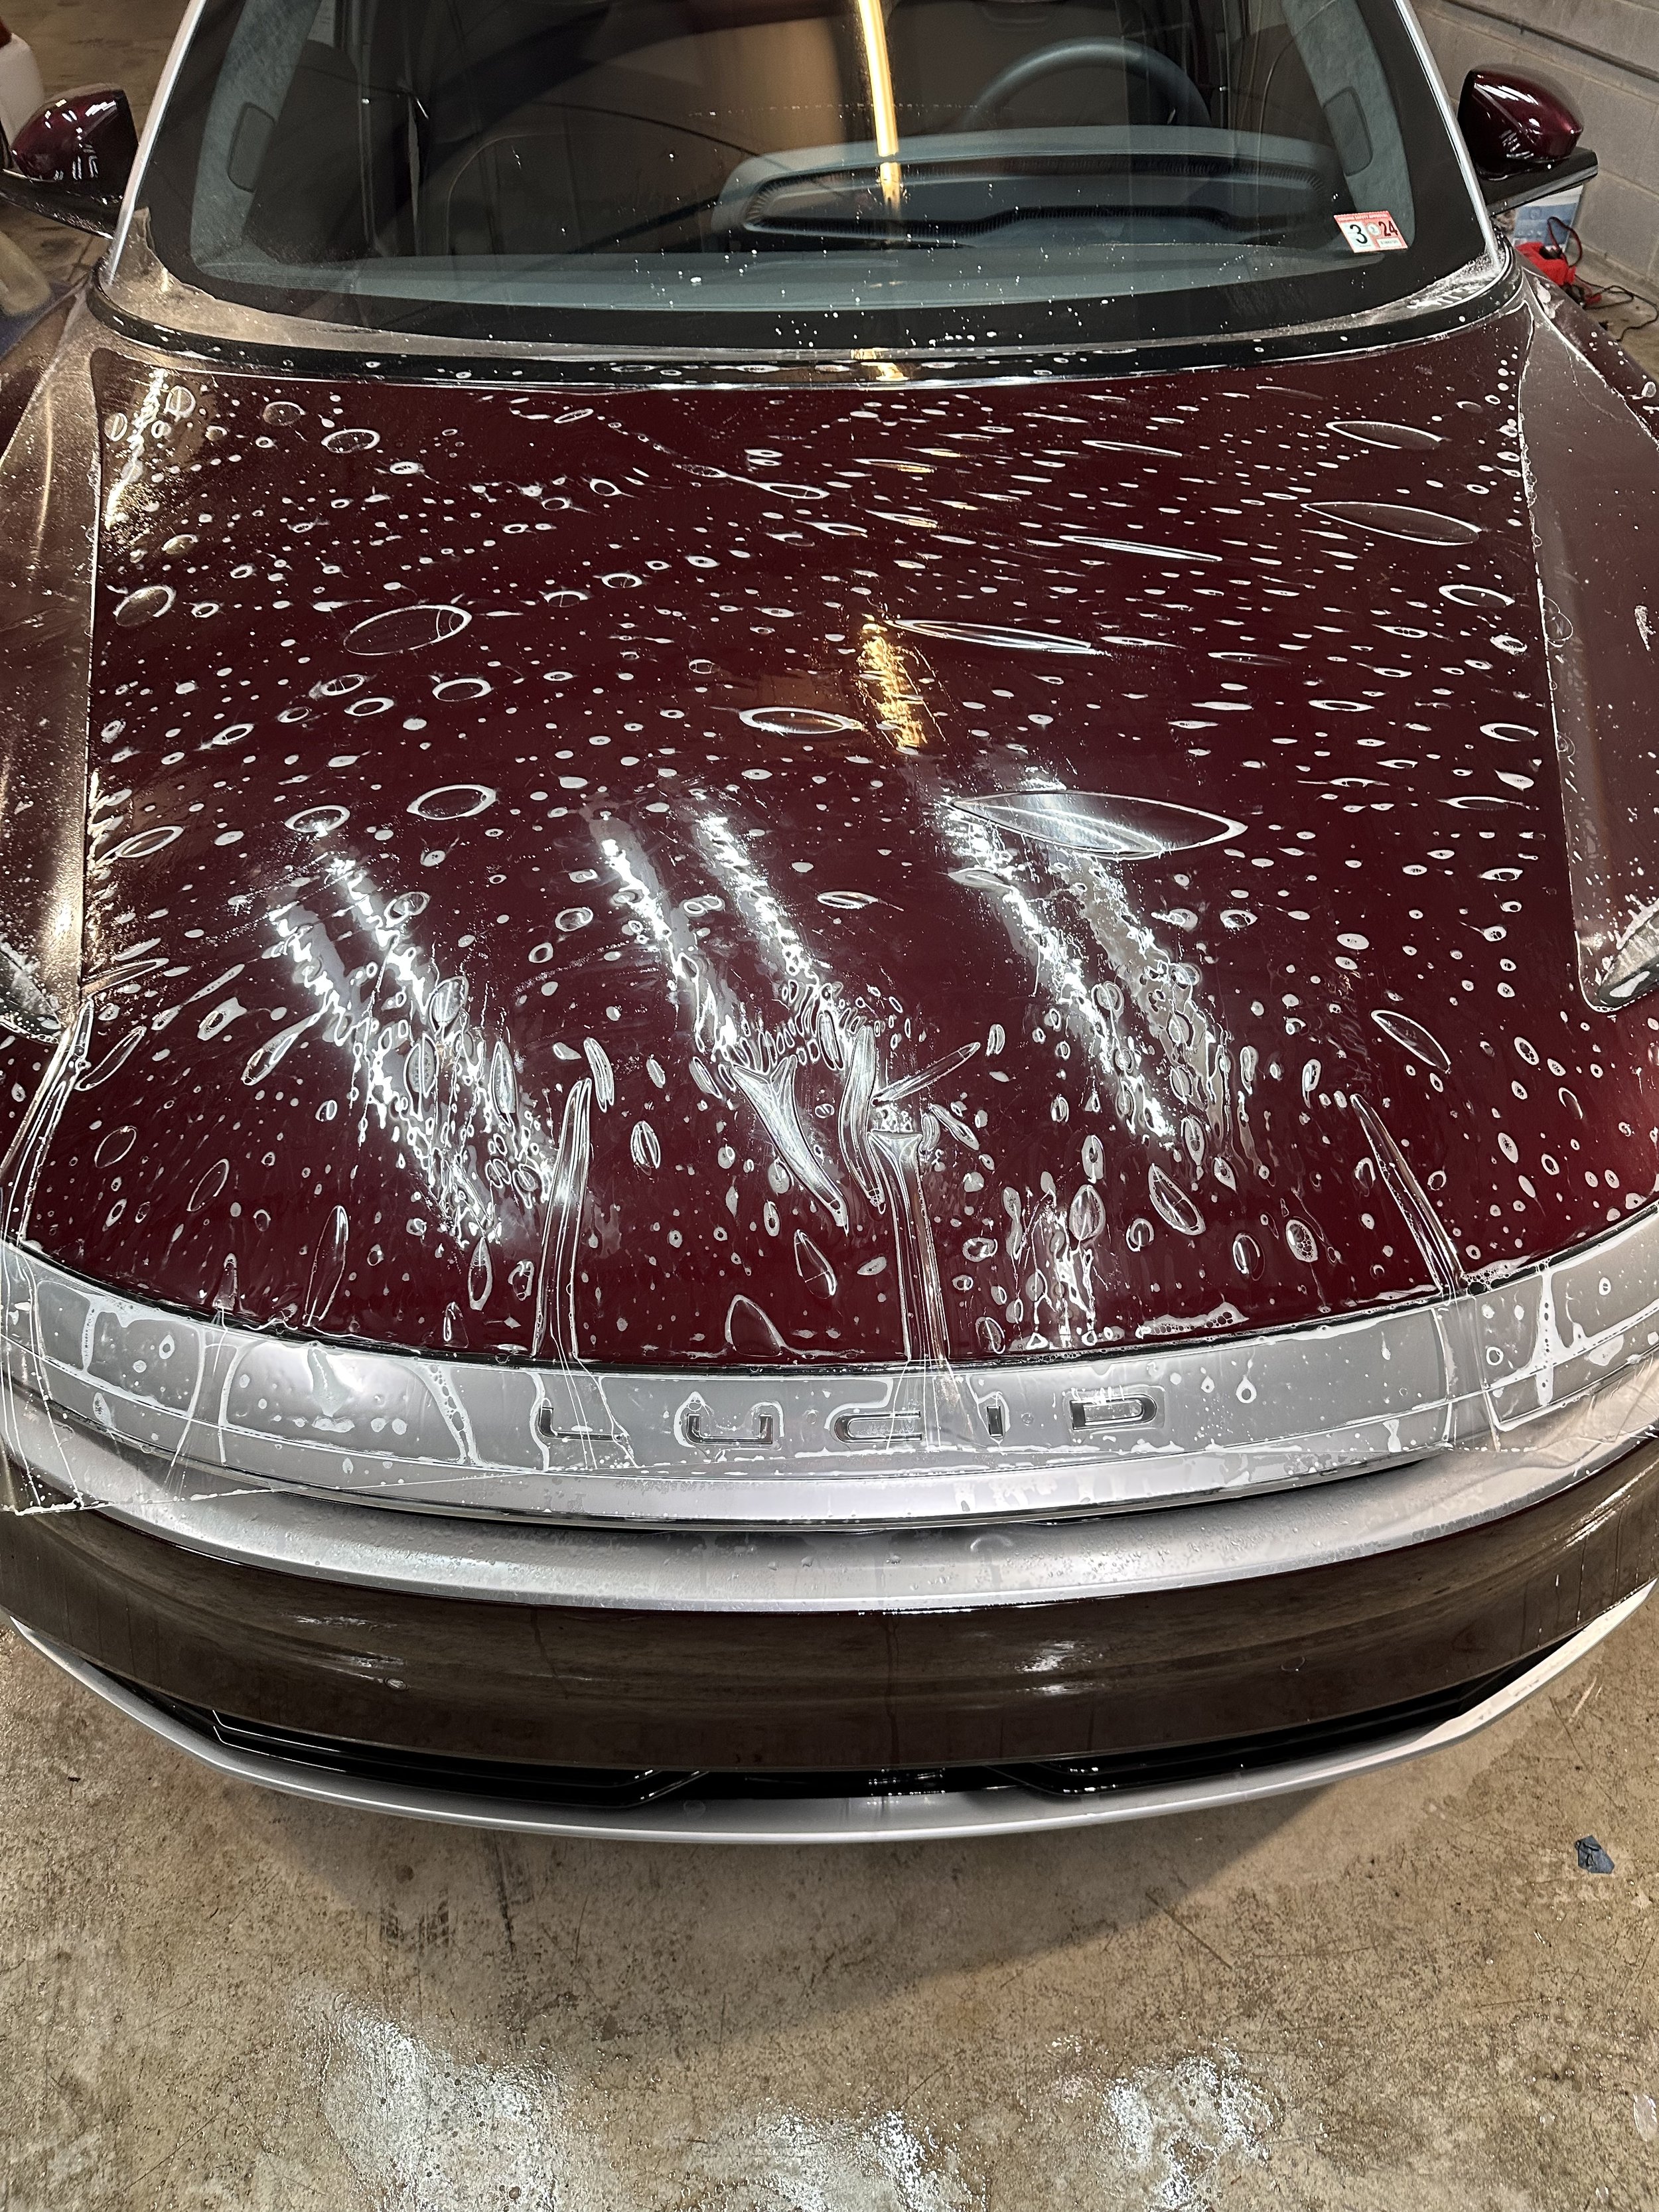 Paint Protection Film vs Ceramic Coating: What's Better? - Blackout Window  Tinting